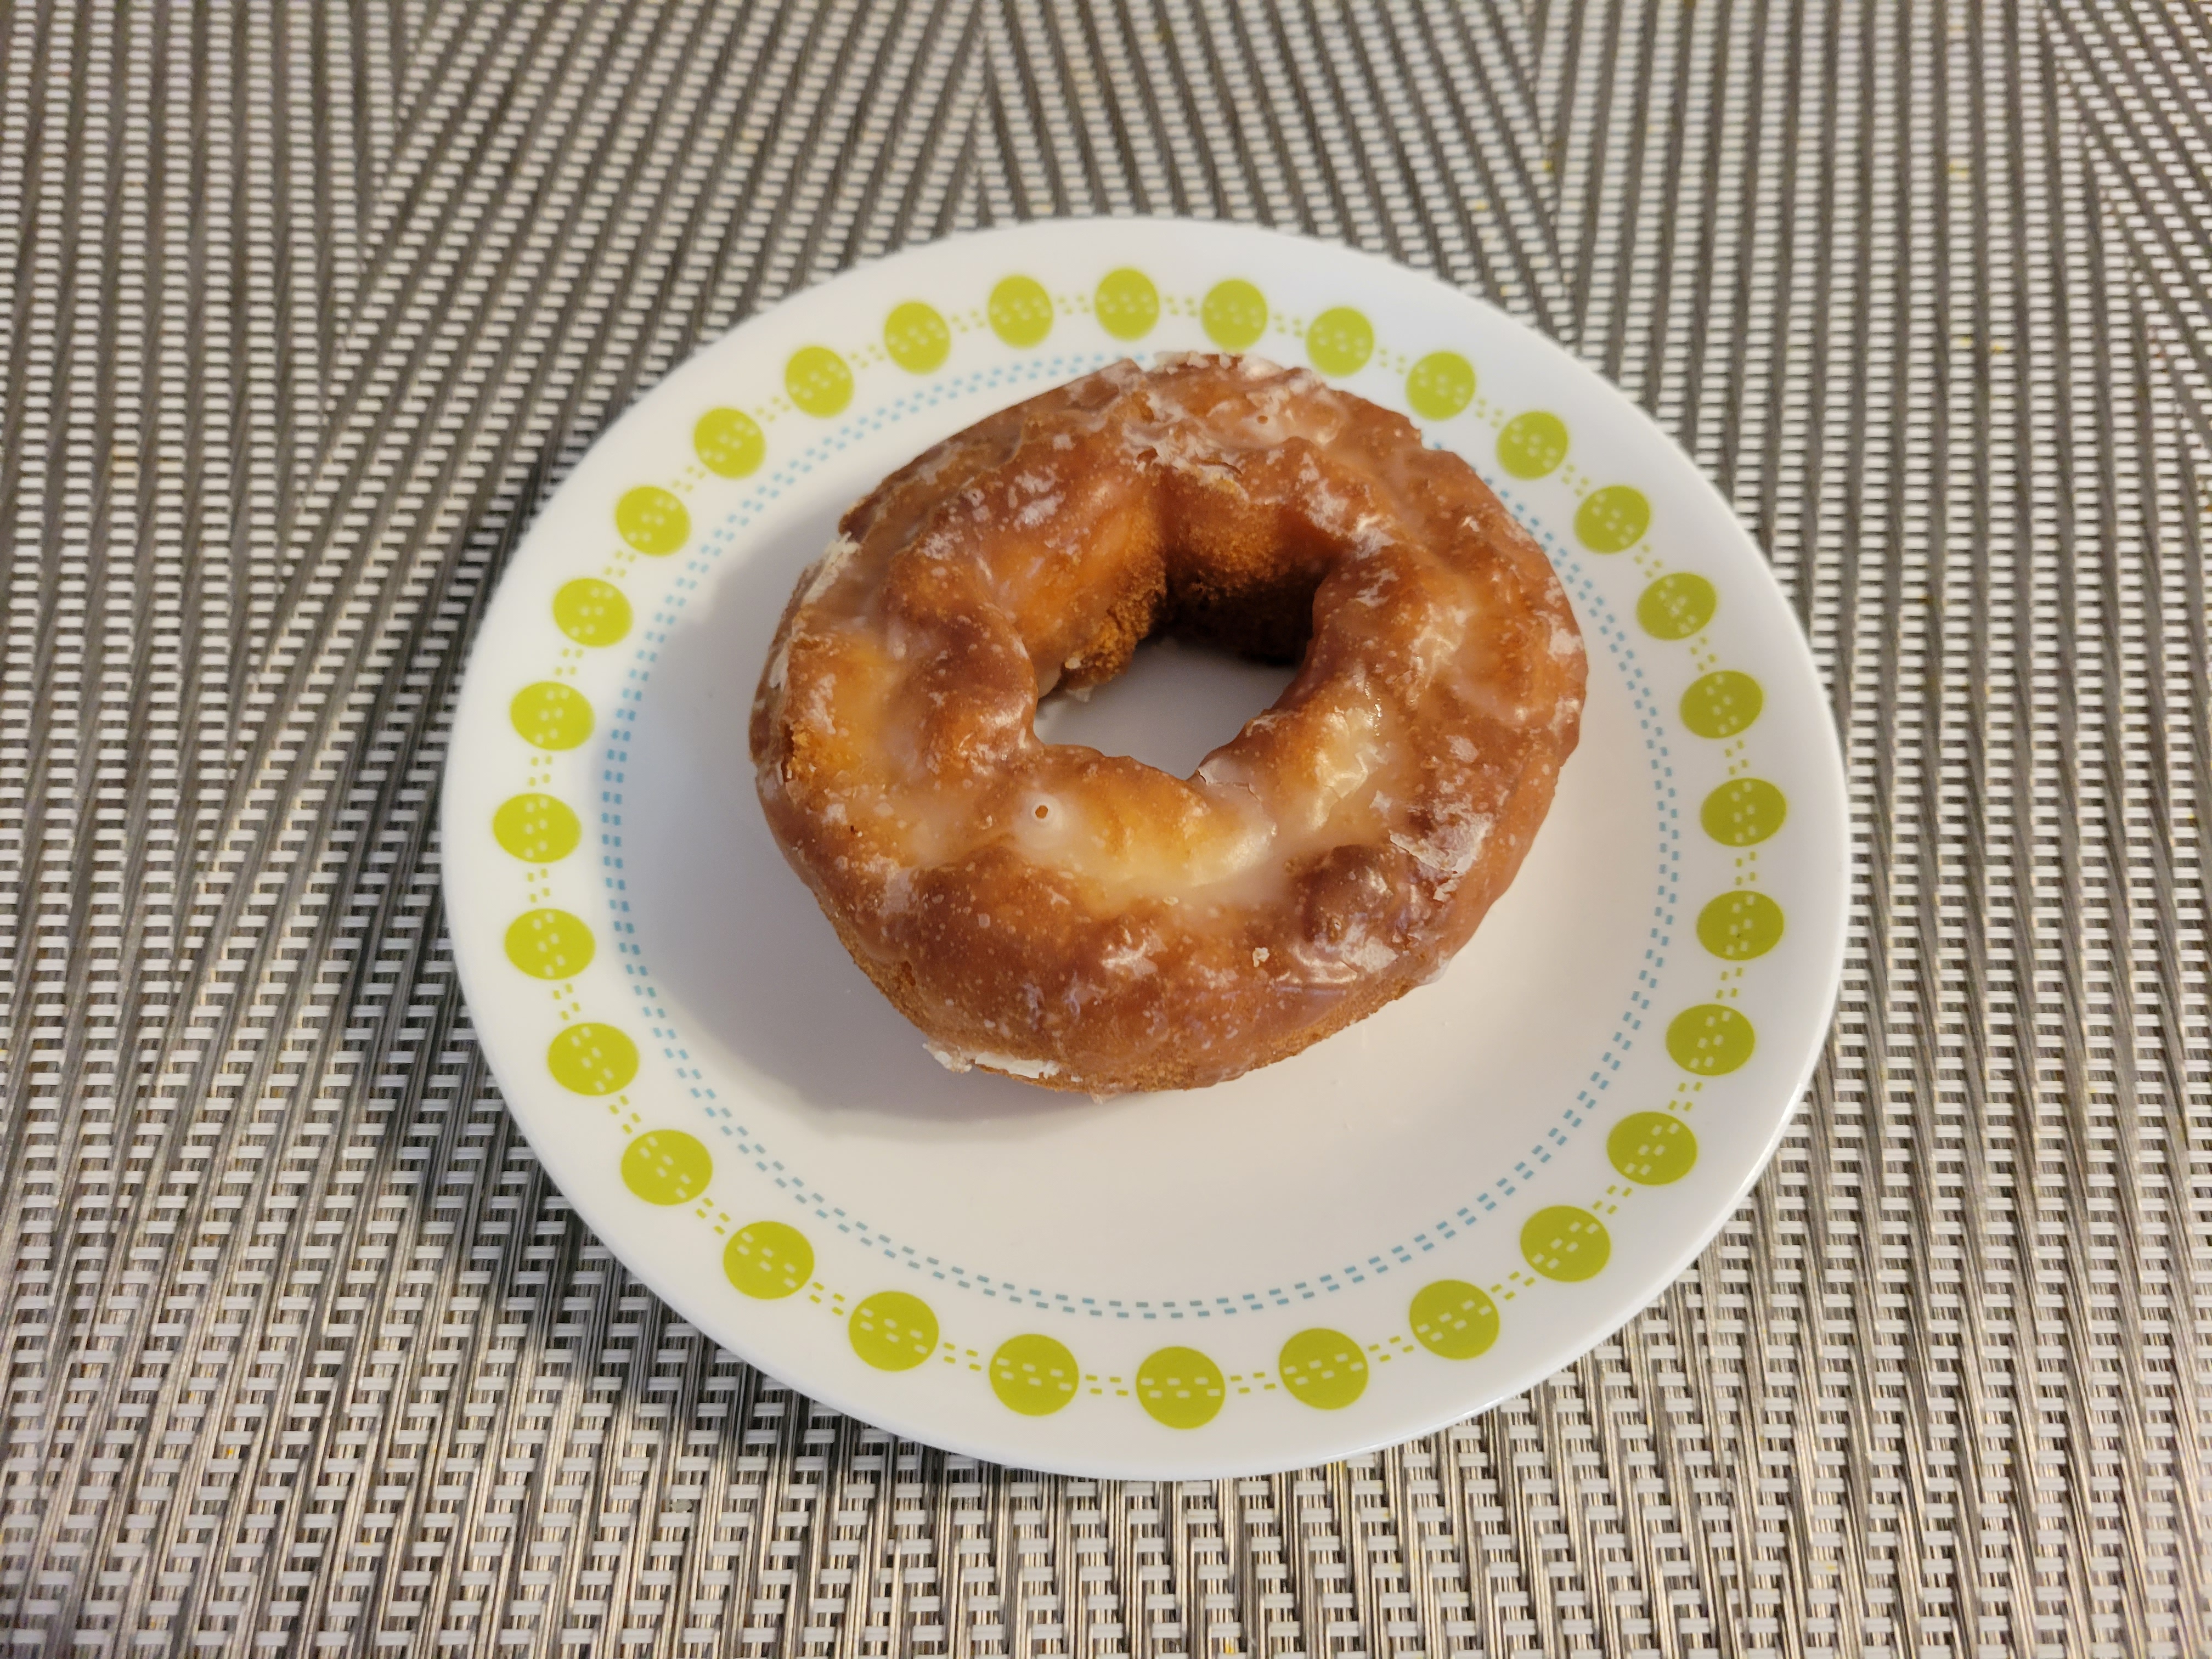 A glazed cake donut on a small plate. Photo by Matthew Macomber.